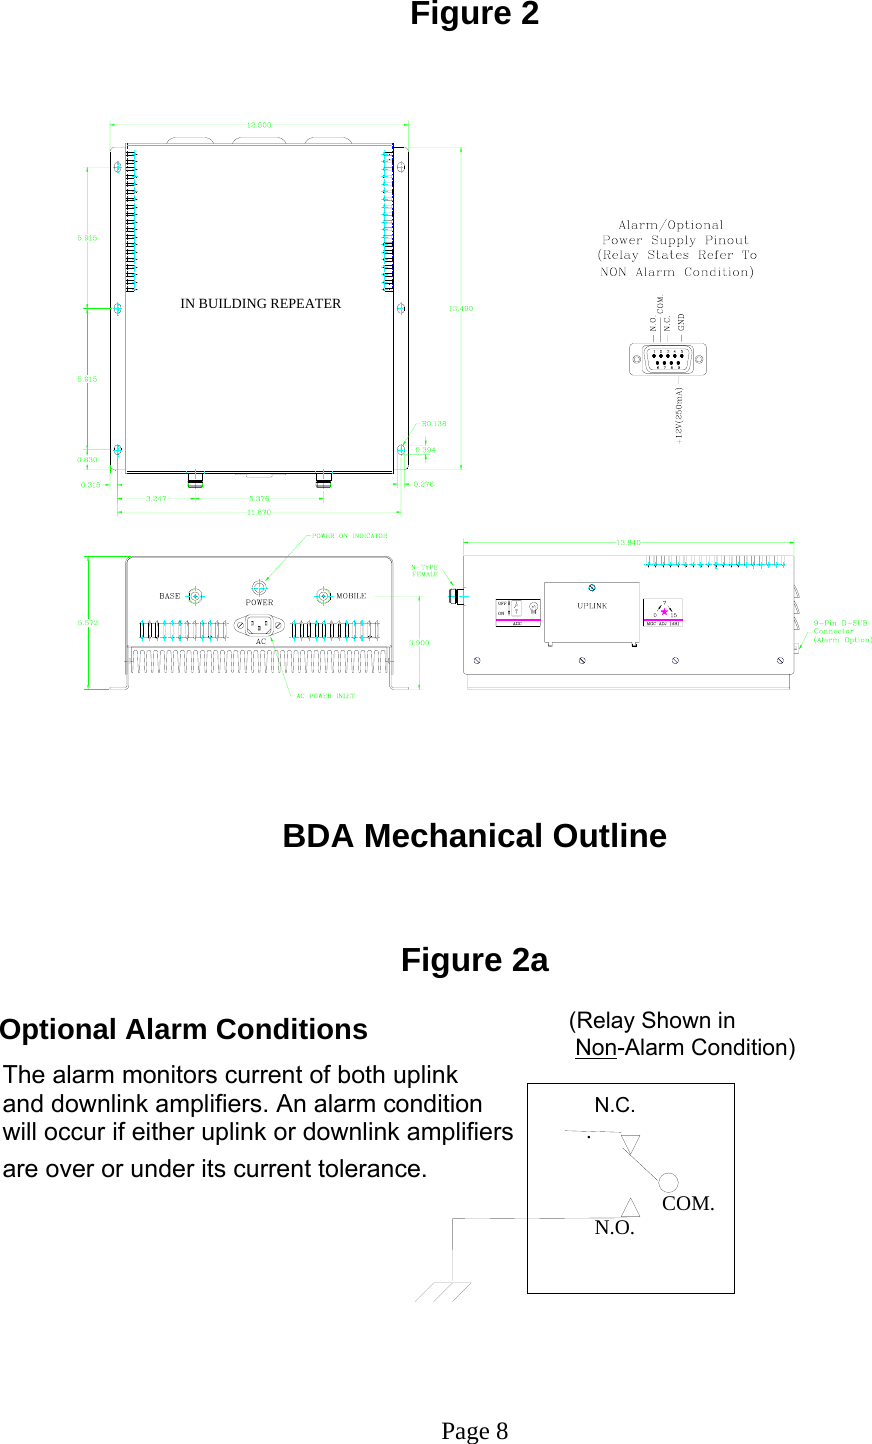         .                                                  COM.           N.O.  Figure 2    IN BUILDING REPEATER             BDA Mechanical Outline    Figure 2a    (Relay Shown in         Non-Alarm Condition) The alarm monitors current of both uplink and downlink amplifiers. An alarm condition                N.C.                                              will occur if either uplink or downlink amplifiers                                                         are over or under its current tolerance.                                                                                                                                                              Page 8 Optional Alarm Conditions 